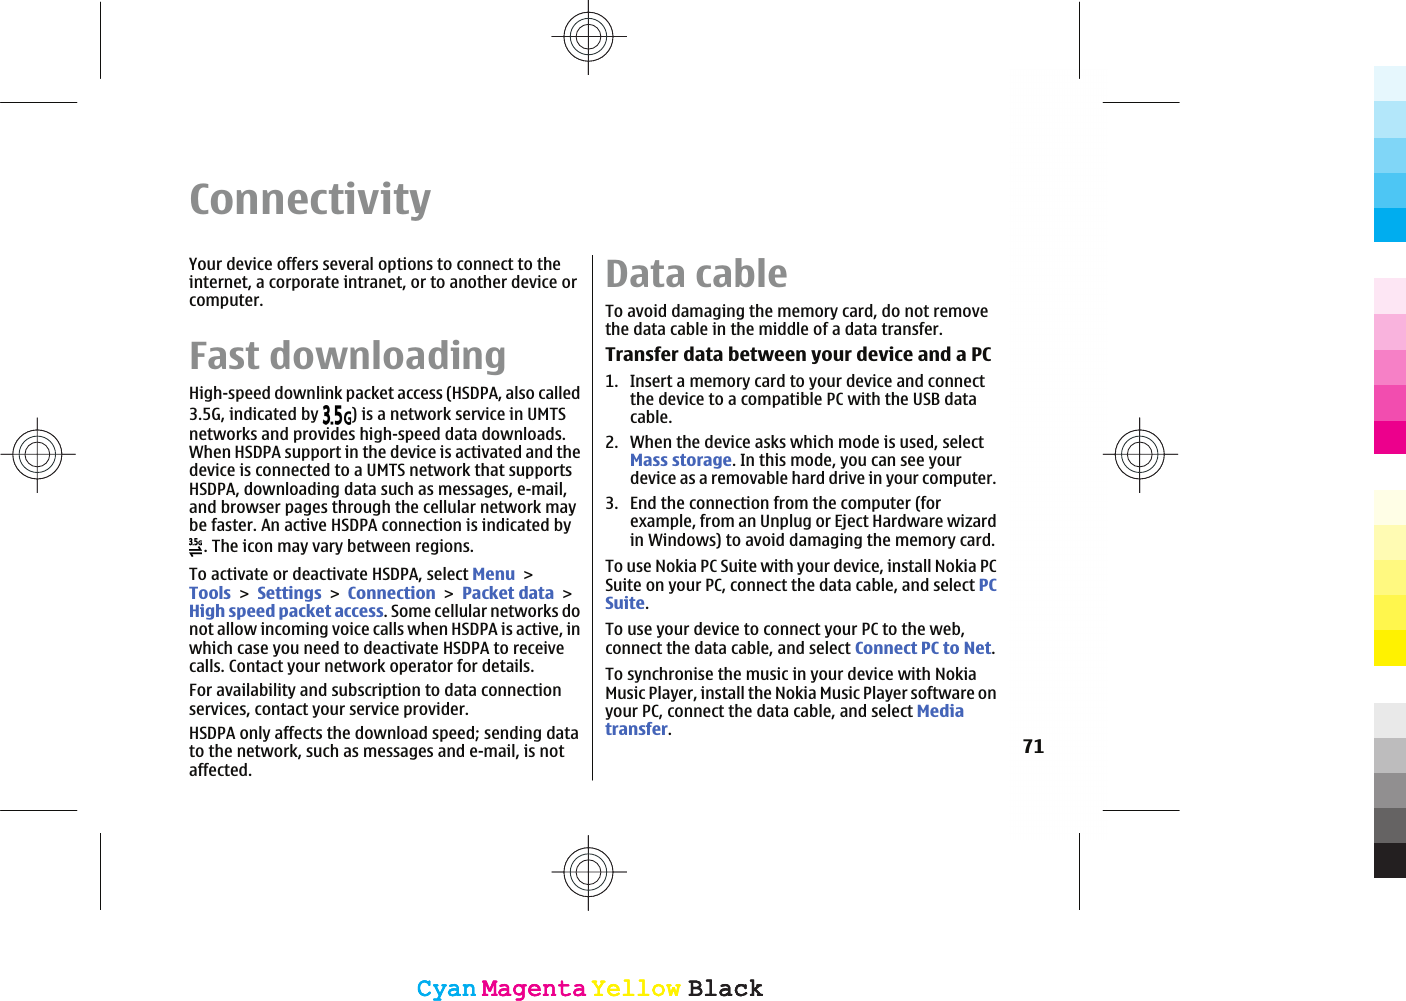 ConnectivityYour device offers several options to connect to theinternet, a corporate intranet, or to another device orcomputer.Fast downloadingHigh-speed downlink packet access (HSDPA, also called3.5G, indicated by  ) is a network service in UMTSnetworks and provides high-speed data downloads.When HSDPA support in the device is activated and thedevice is connected to a UMTS network that supportsHSDPA, downloading data such as messages, e-mail,and browser pages through the cellular network maybe faster. An active HSDPA connection is indicated by. The icon may vary between regions.To activate or deactivate HSDPA, select MenuToolsSettingsConnectionPacket dataHigh speed packet access. Some cellular networks donot allow incoming voice calls when HSDPA is active, inwhich case you need to deactivate HSDPA to receivecalls. Contact your network operator for details.For availability and subscription to data connectionservices, contact your service provider.HSDPA only affects the download speed; sending datato the network, such as messages and e-mail, is notaffected.Data cableTo avoid damaging the memory card, do not removethe data cable in the middle of a data transfer.Transfer data between your device and a PC1. Insert a memory card to your device and connectthe device to a compatible PC with the USB datacable.2. When the device asks which mode is used, selectMass storage. In this mode, you can see yourdevice as a removable hard drive in your computer.3. End the connection from the computer (forexample, from an Unplug or Eject Hardware wizardin Windows) to avoid damaging the memory card.To use Nokia PC Suite with your device, install Nokia PCSuite on your PC, connect the data cable, and select PCSuite.To use your device to connect your PC to the web,connect the data cable, and select Connect PC to Net.To synchronise the music in your device with NokiaMusic Player, install the Nokia Music Player software onyour PC, connect the data cable, and select Mediatransfer.71CyanCyanMagentaMagentaYellowYellowBlackBlackCyanCyanMagentaMagentaYellowYellowBlackBlack